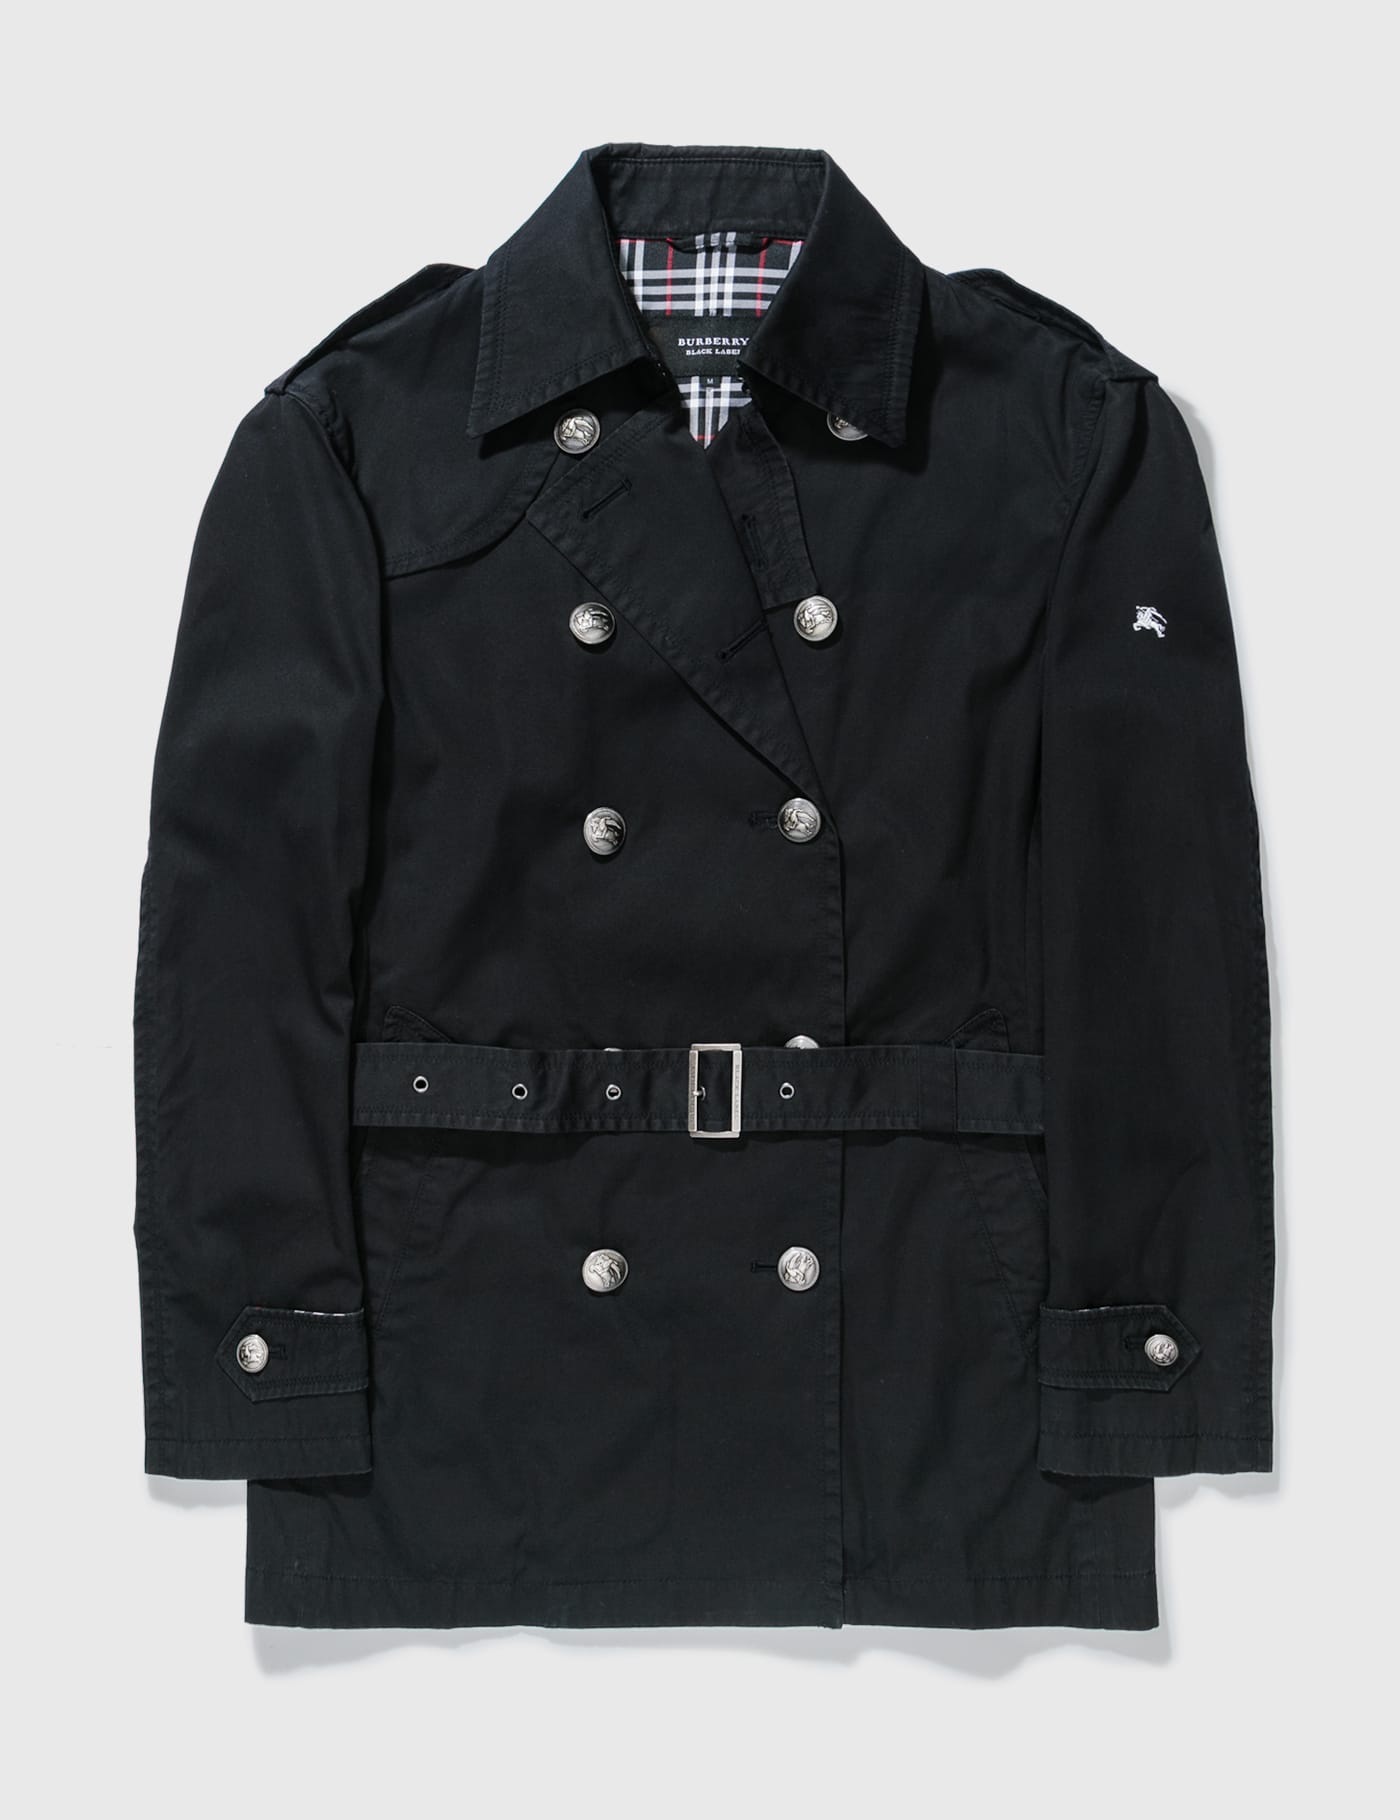 Burberry - Burberry Black Label Trench Coat | HBX - Globally